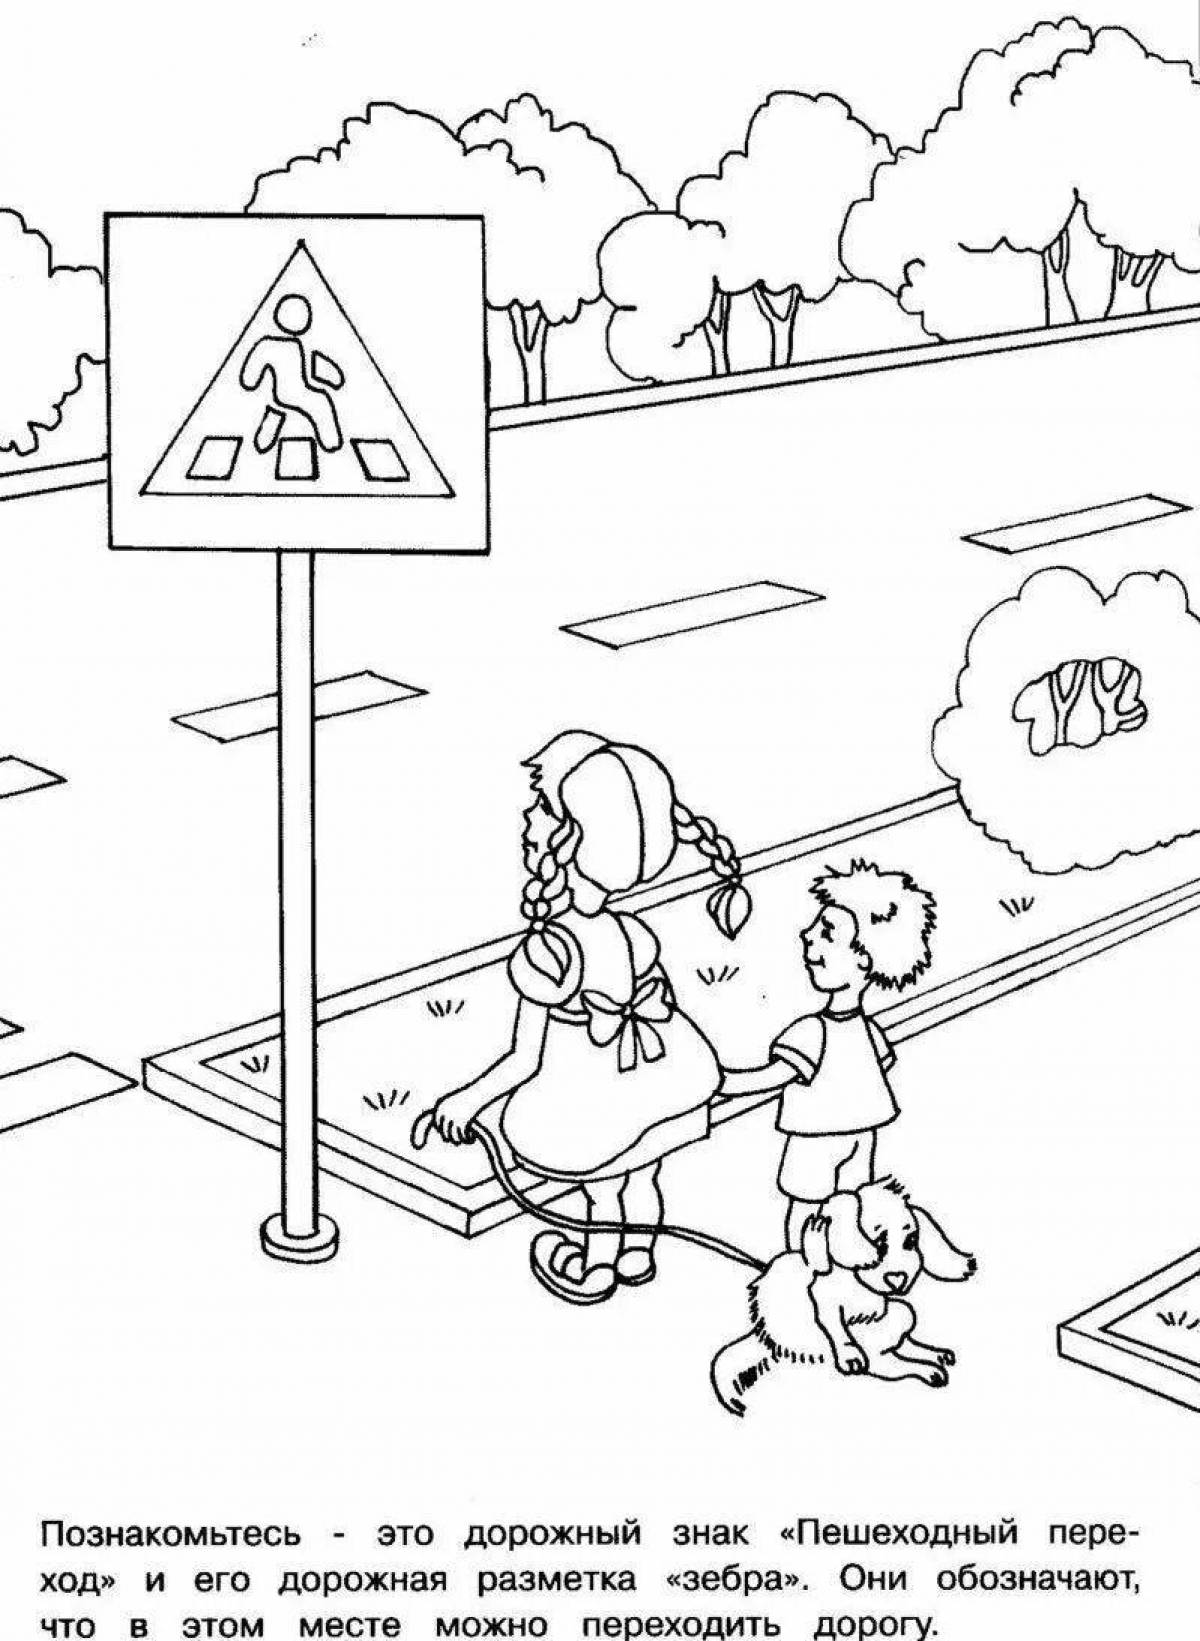 Adorable 1st grade traffic rules coloring page